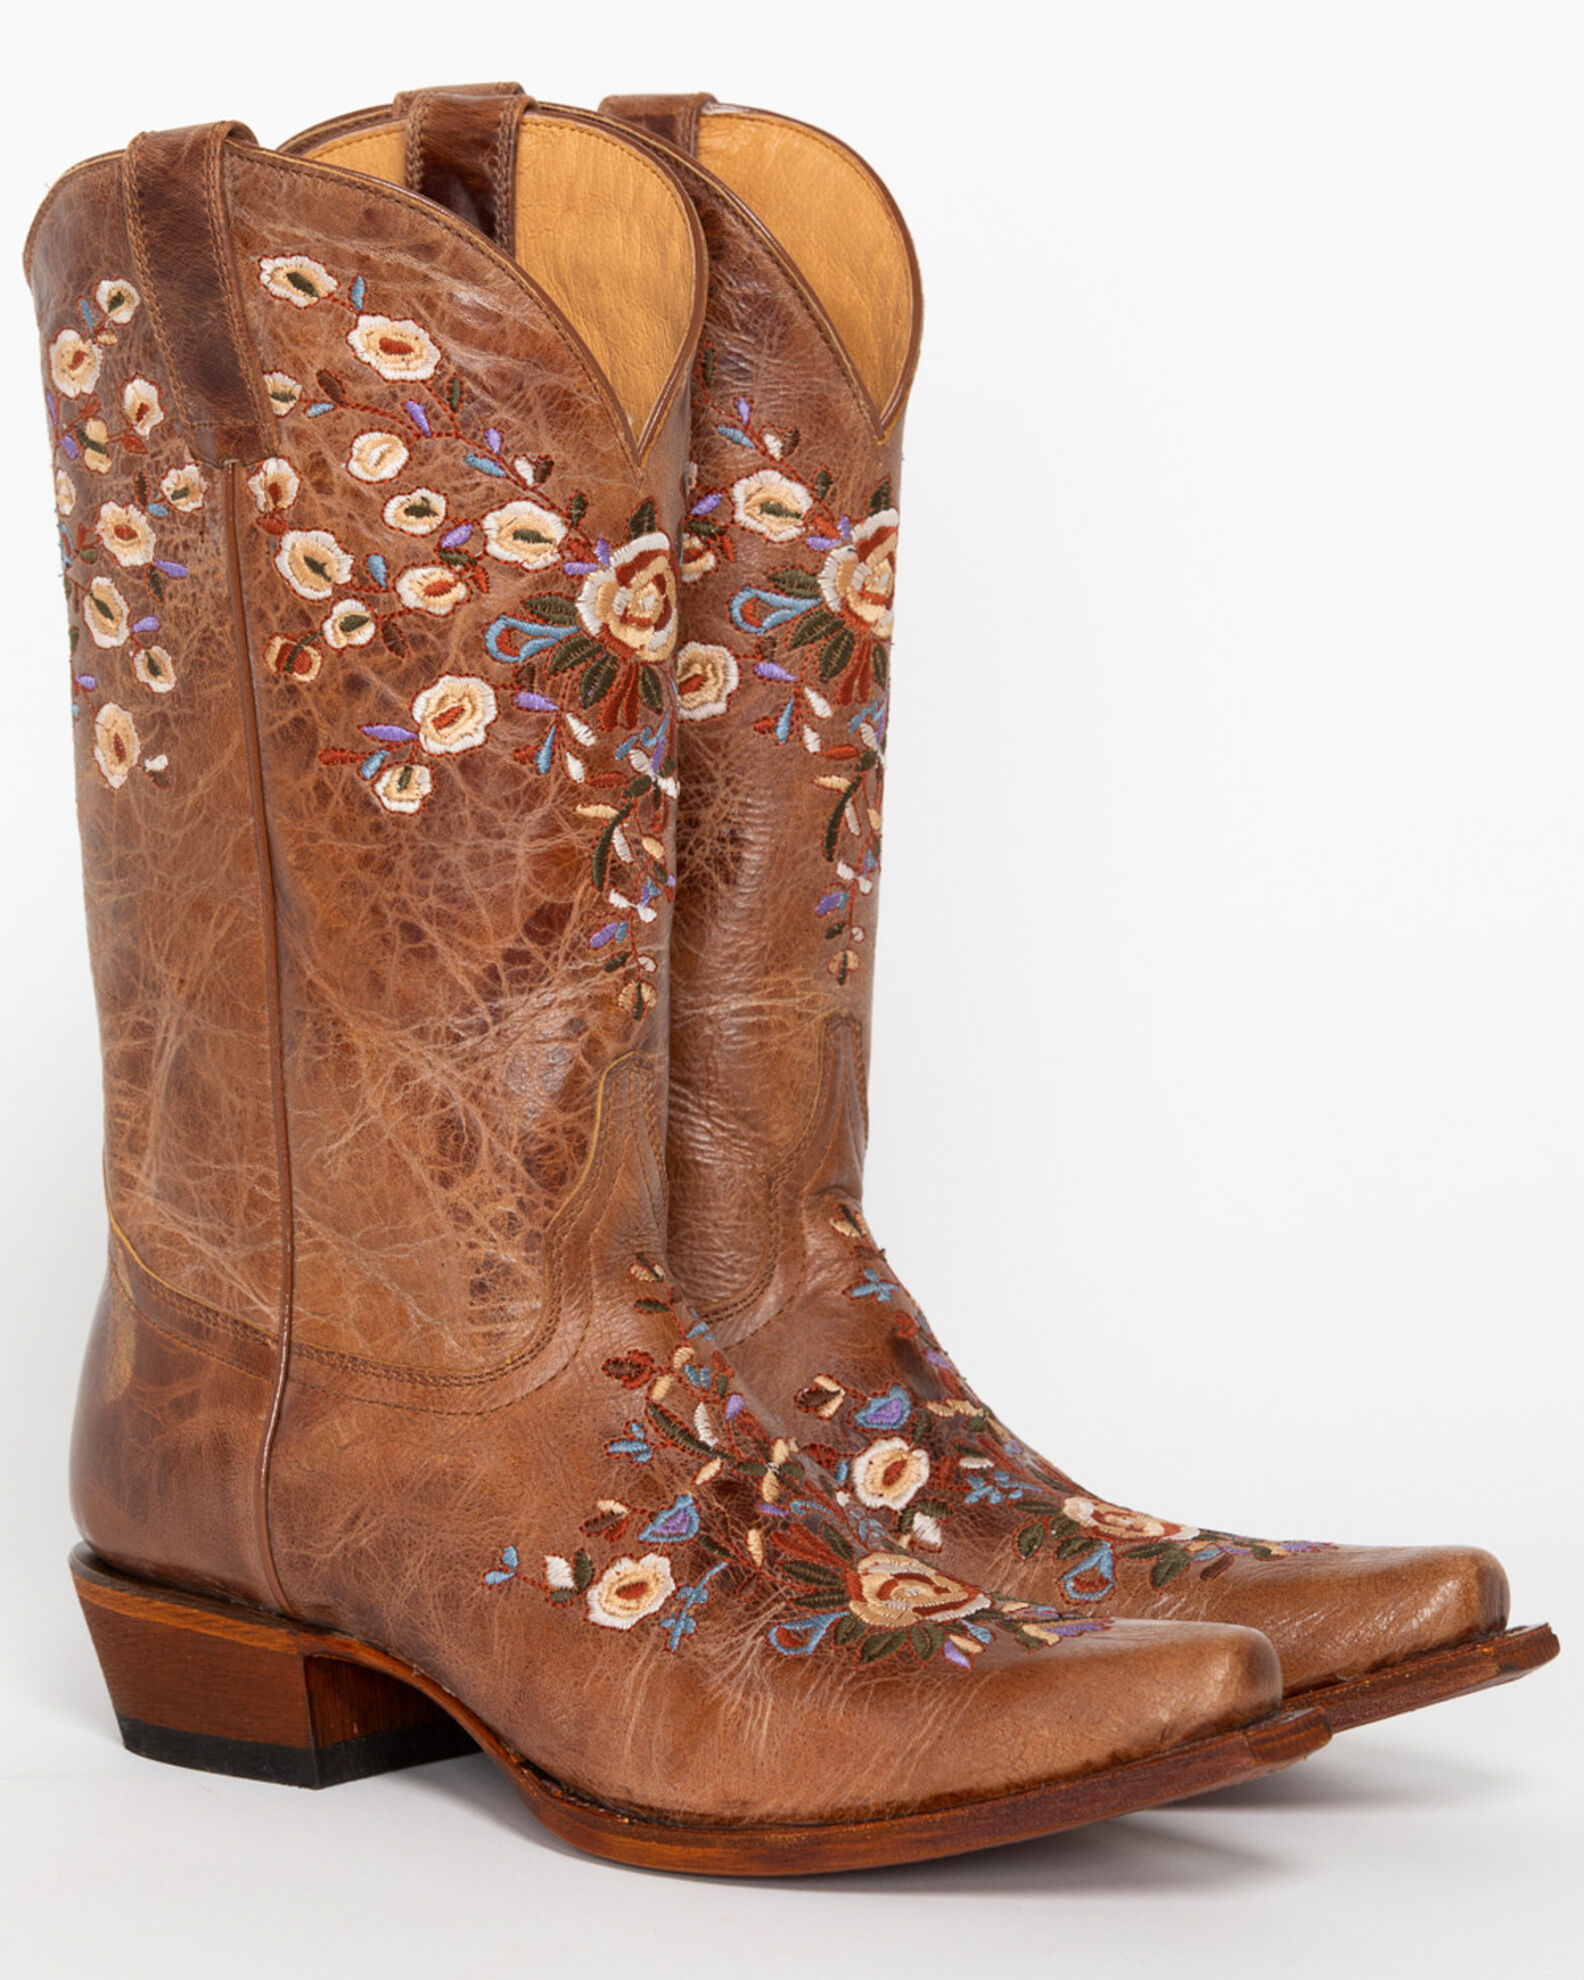 boot barn, Shoes, These Boots Are From Boot Barn